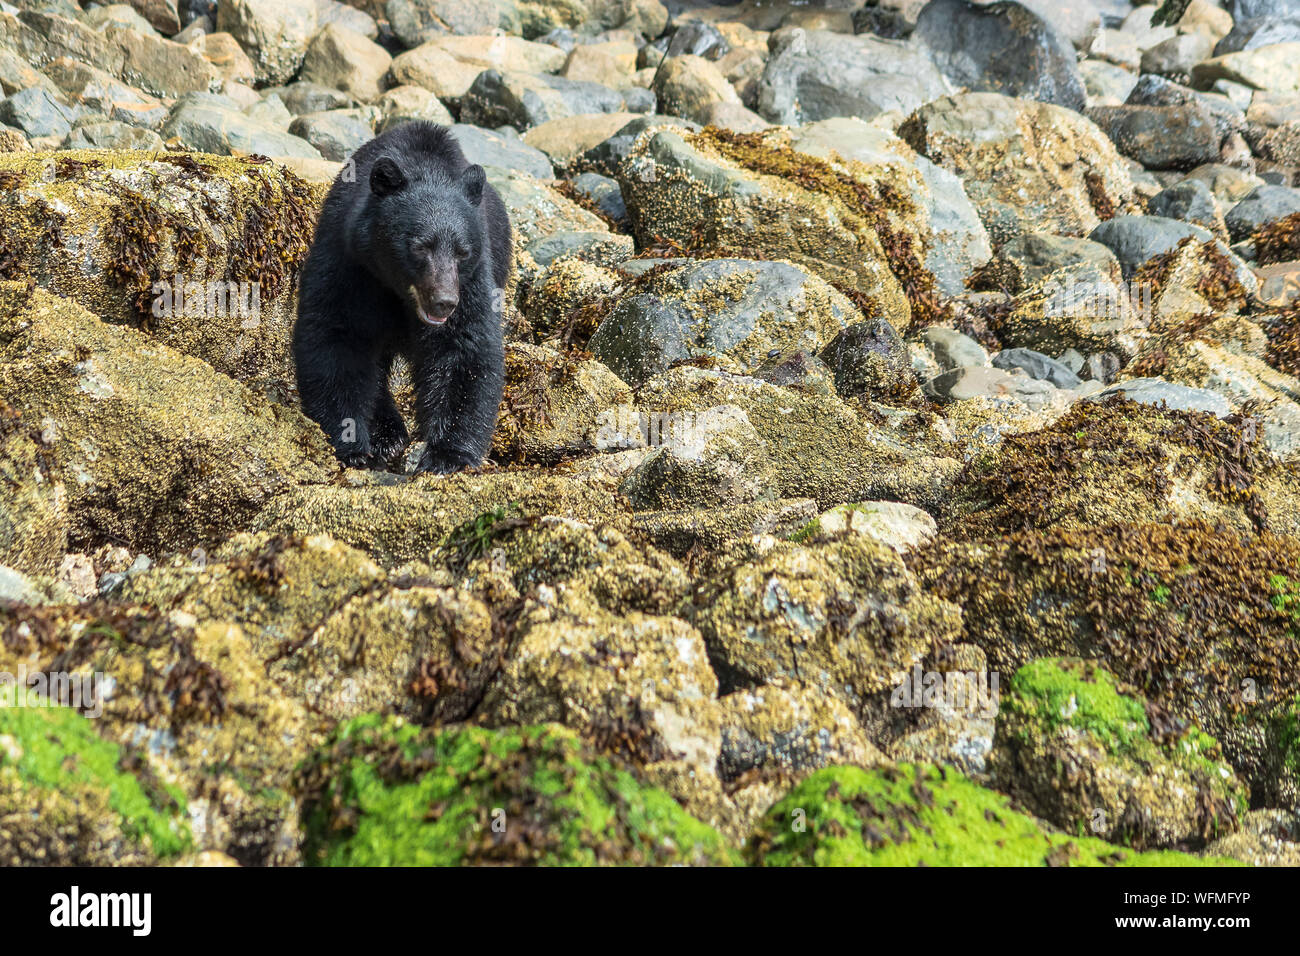 Boat tours from the town of Tofino, BC, take visitors to view Vancouver Island black bears on islands near the Pacific Rim National Park Reserve. Stock Photo